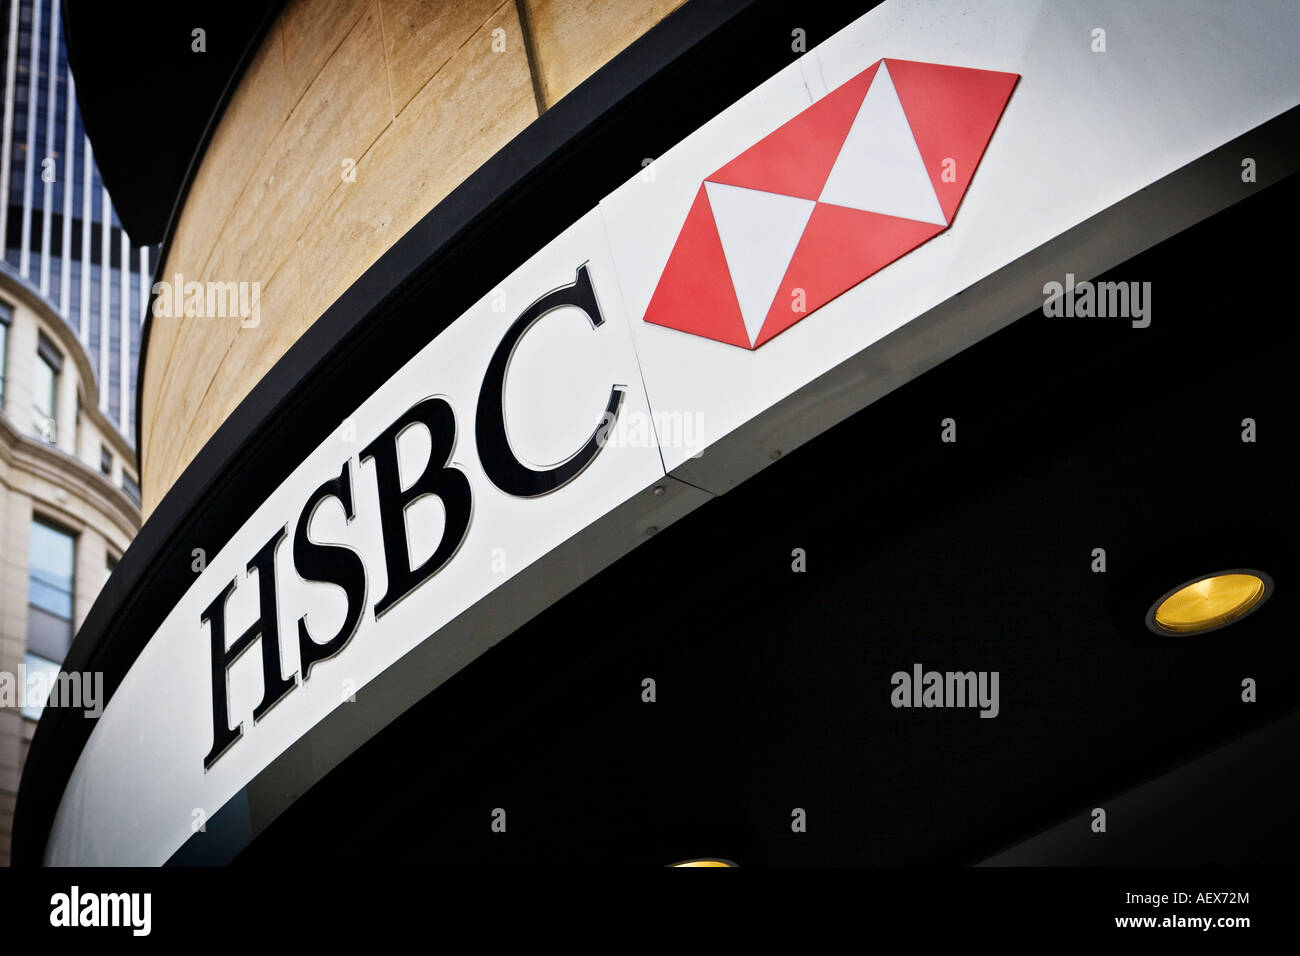 HSBC bank branch in City of London Stock Photo